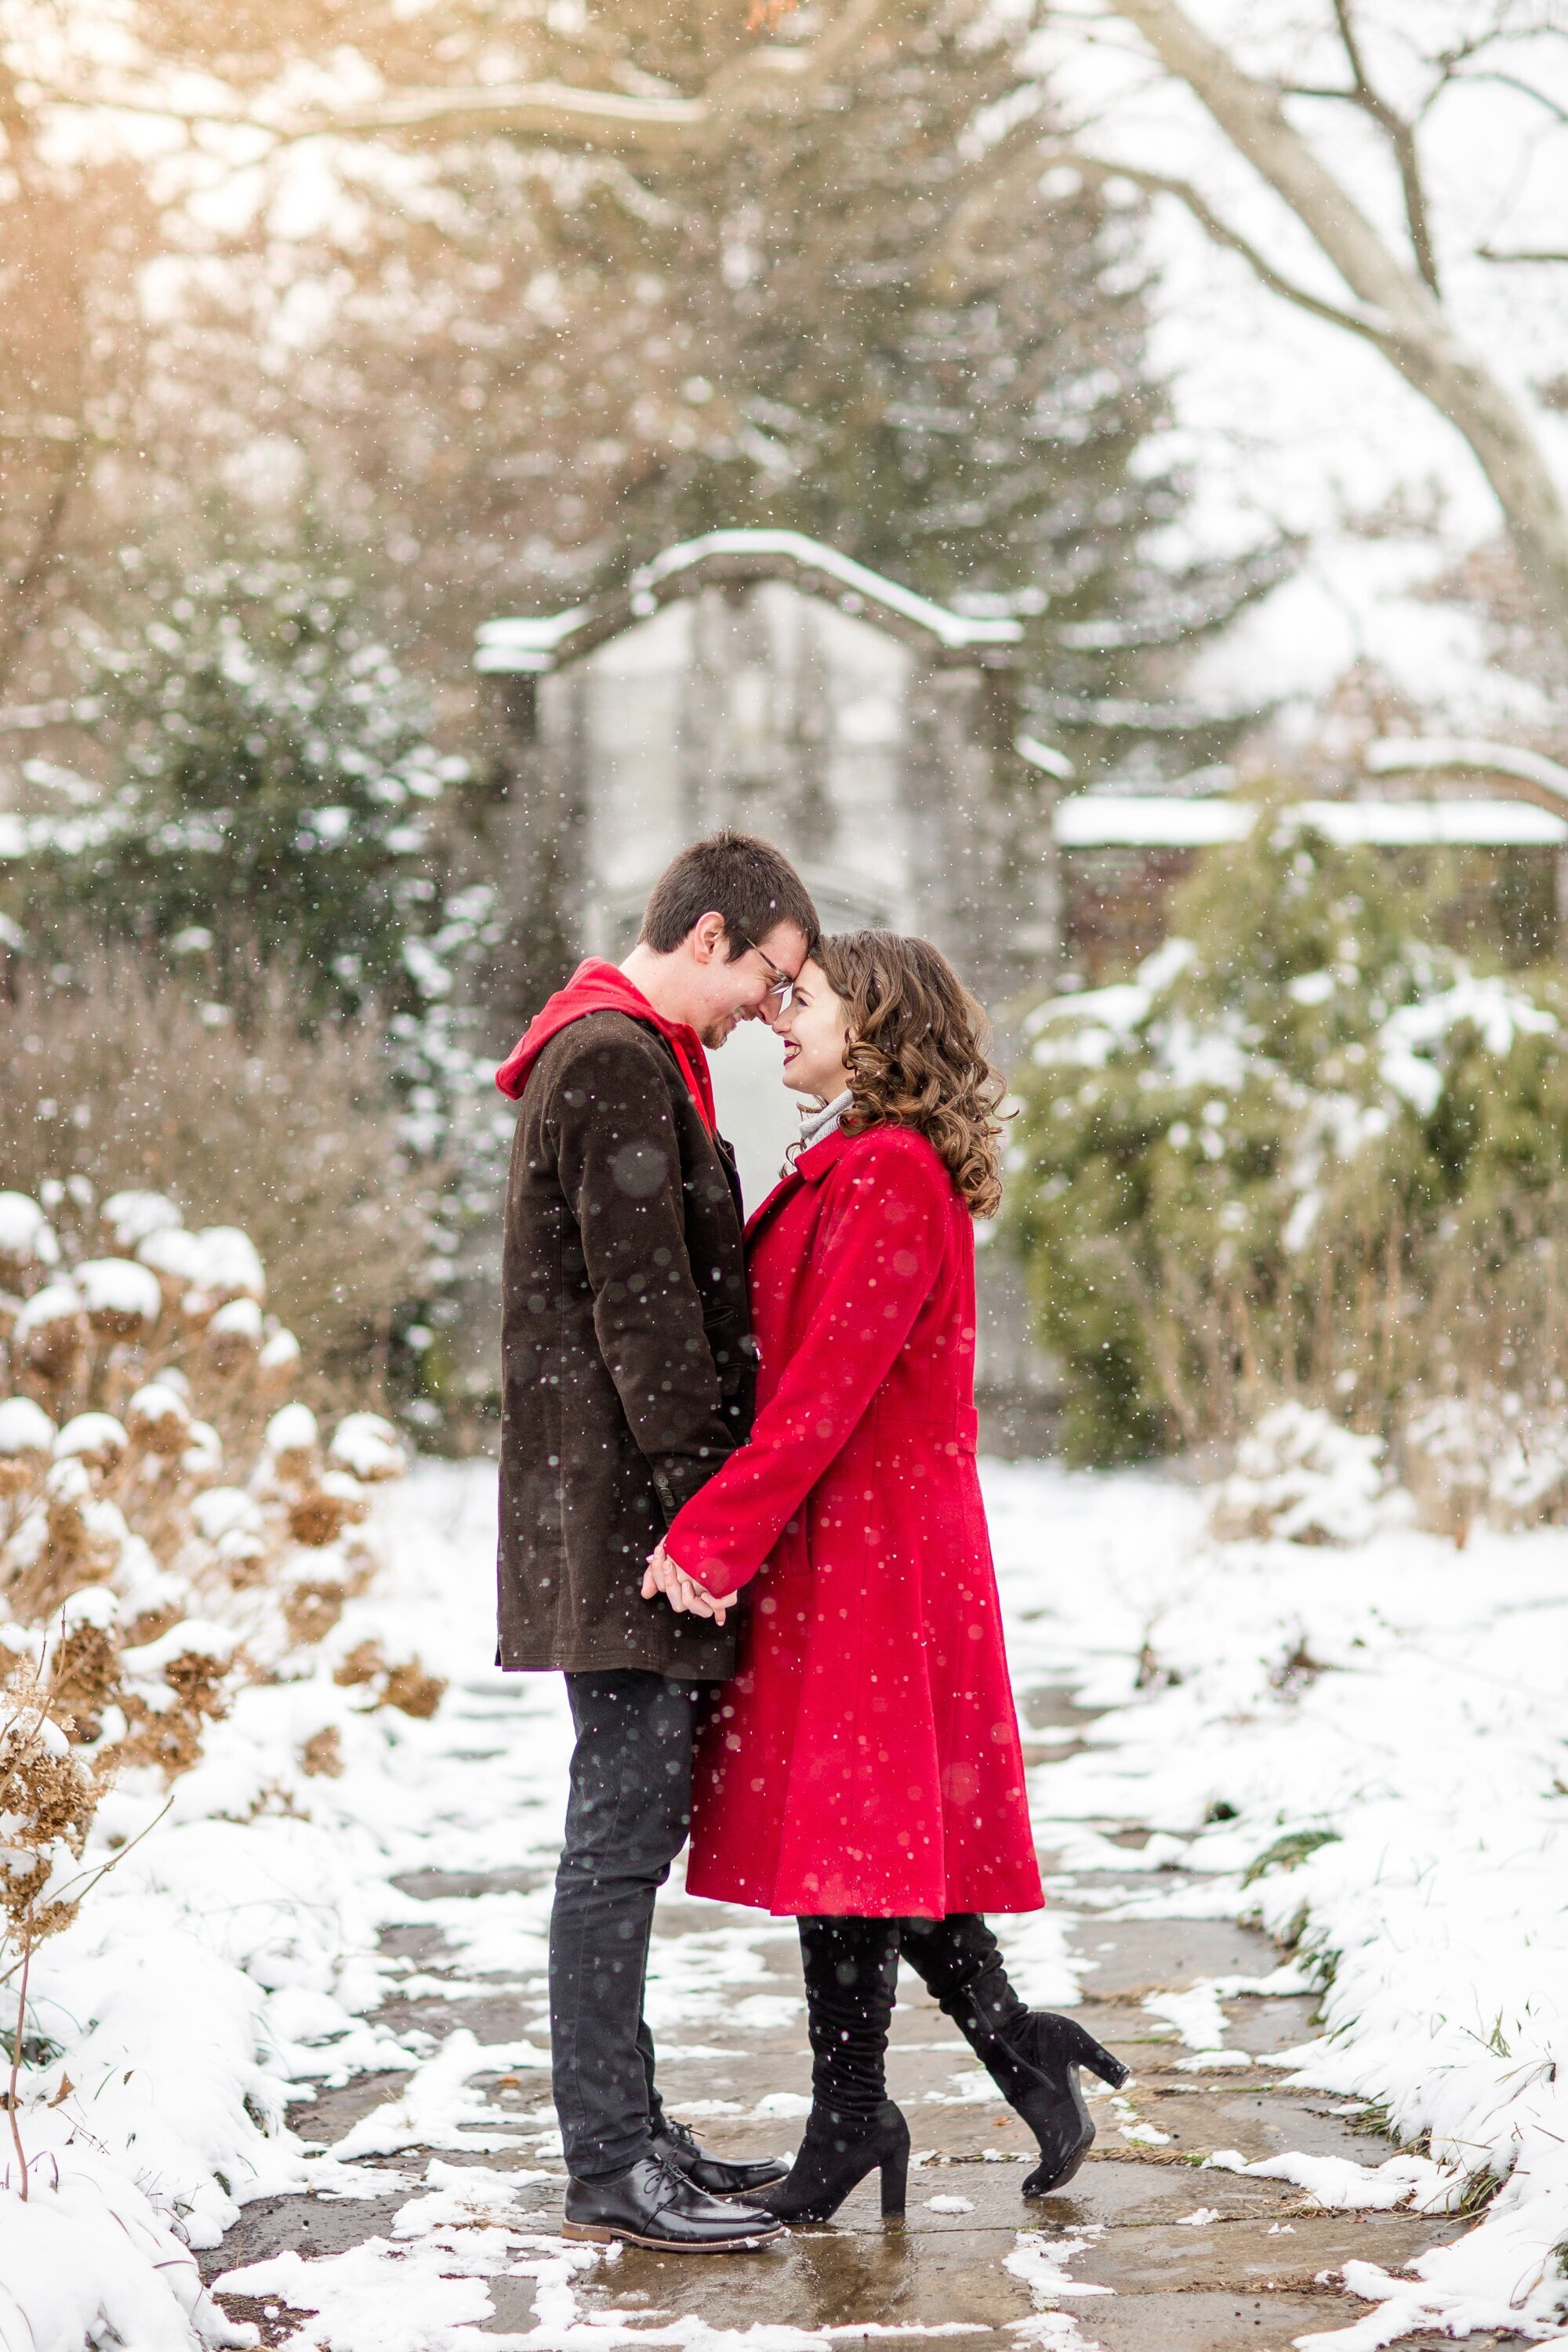 winter photoshoot outfit ideas, winter photoshoot location ideas pittsburgh, winter photoshoot outfits family, winter photoshoot ideas, winter photo shoot couples